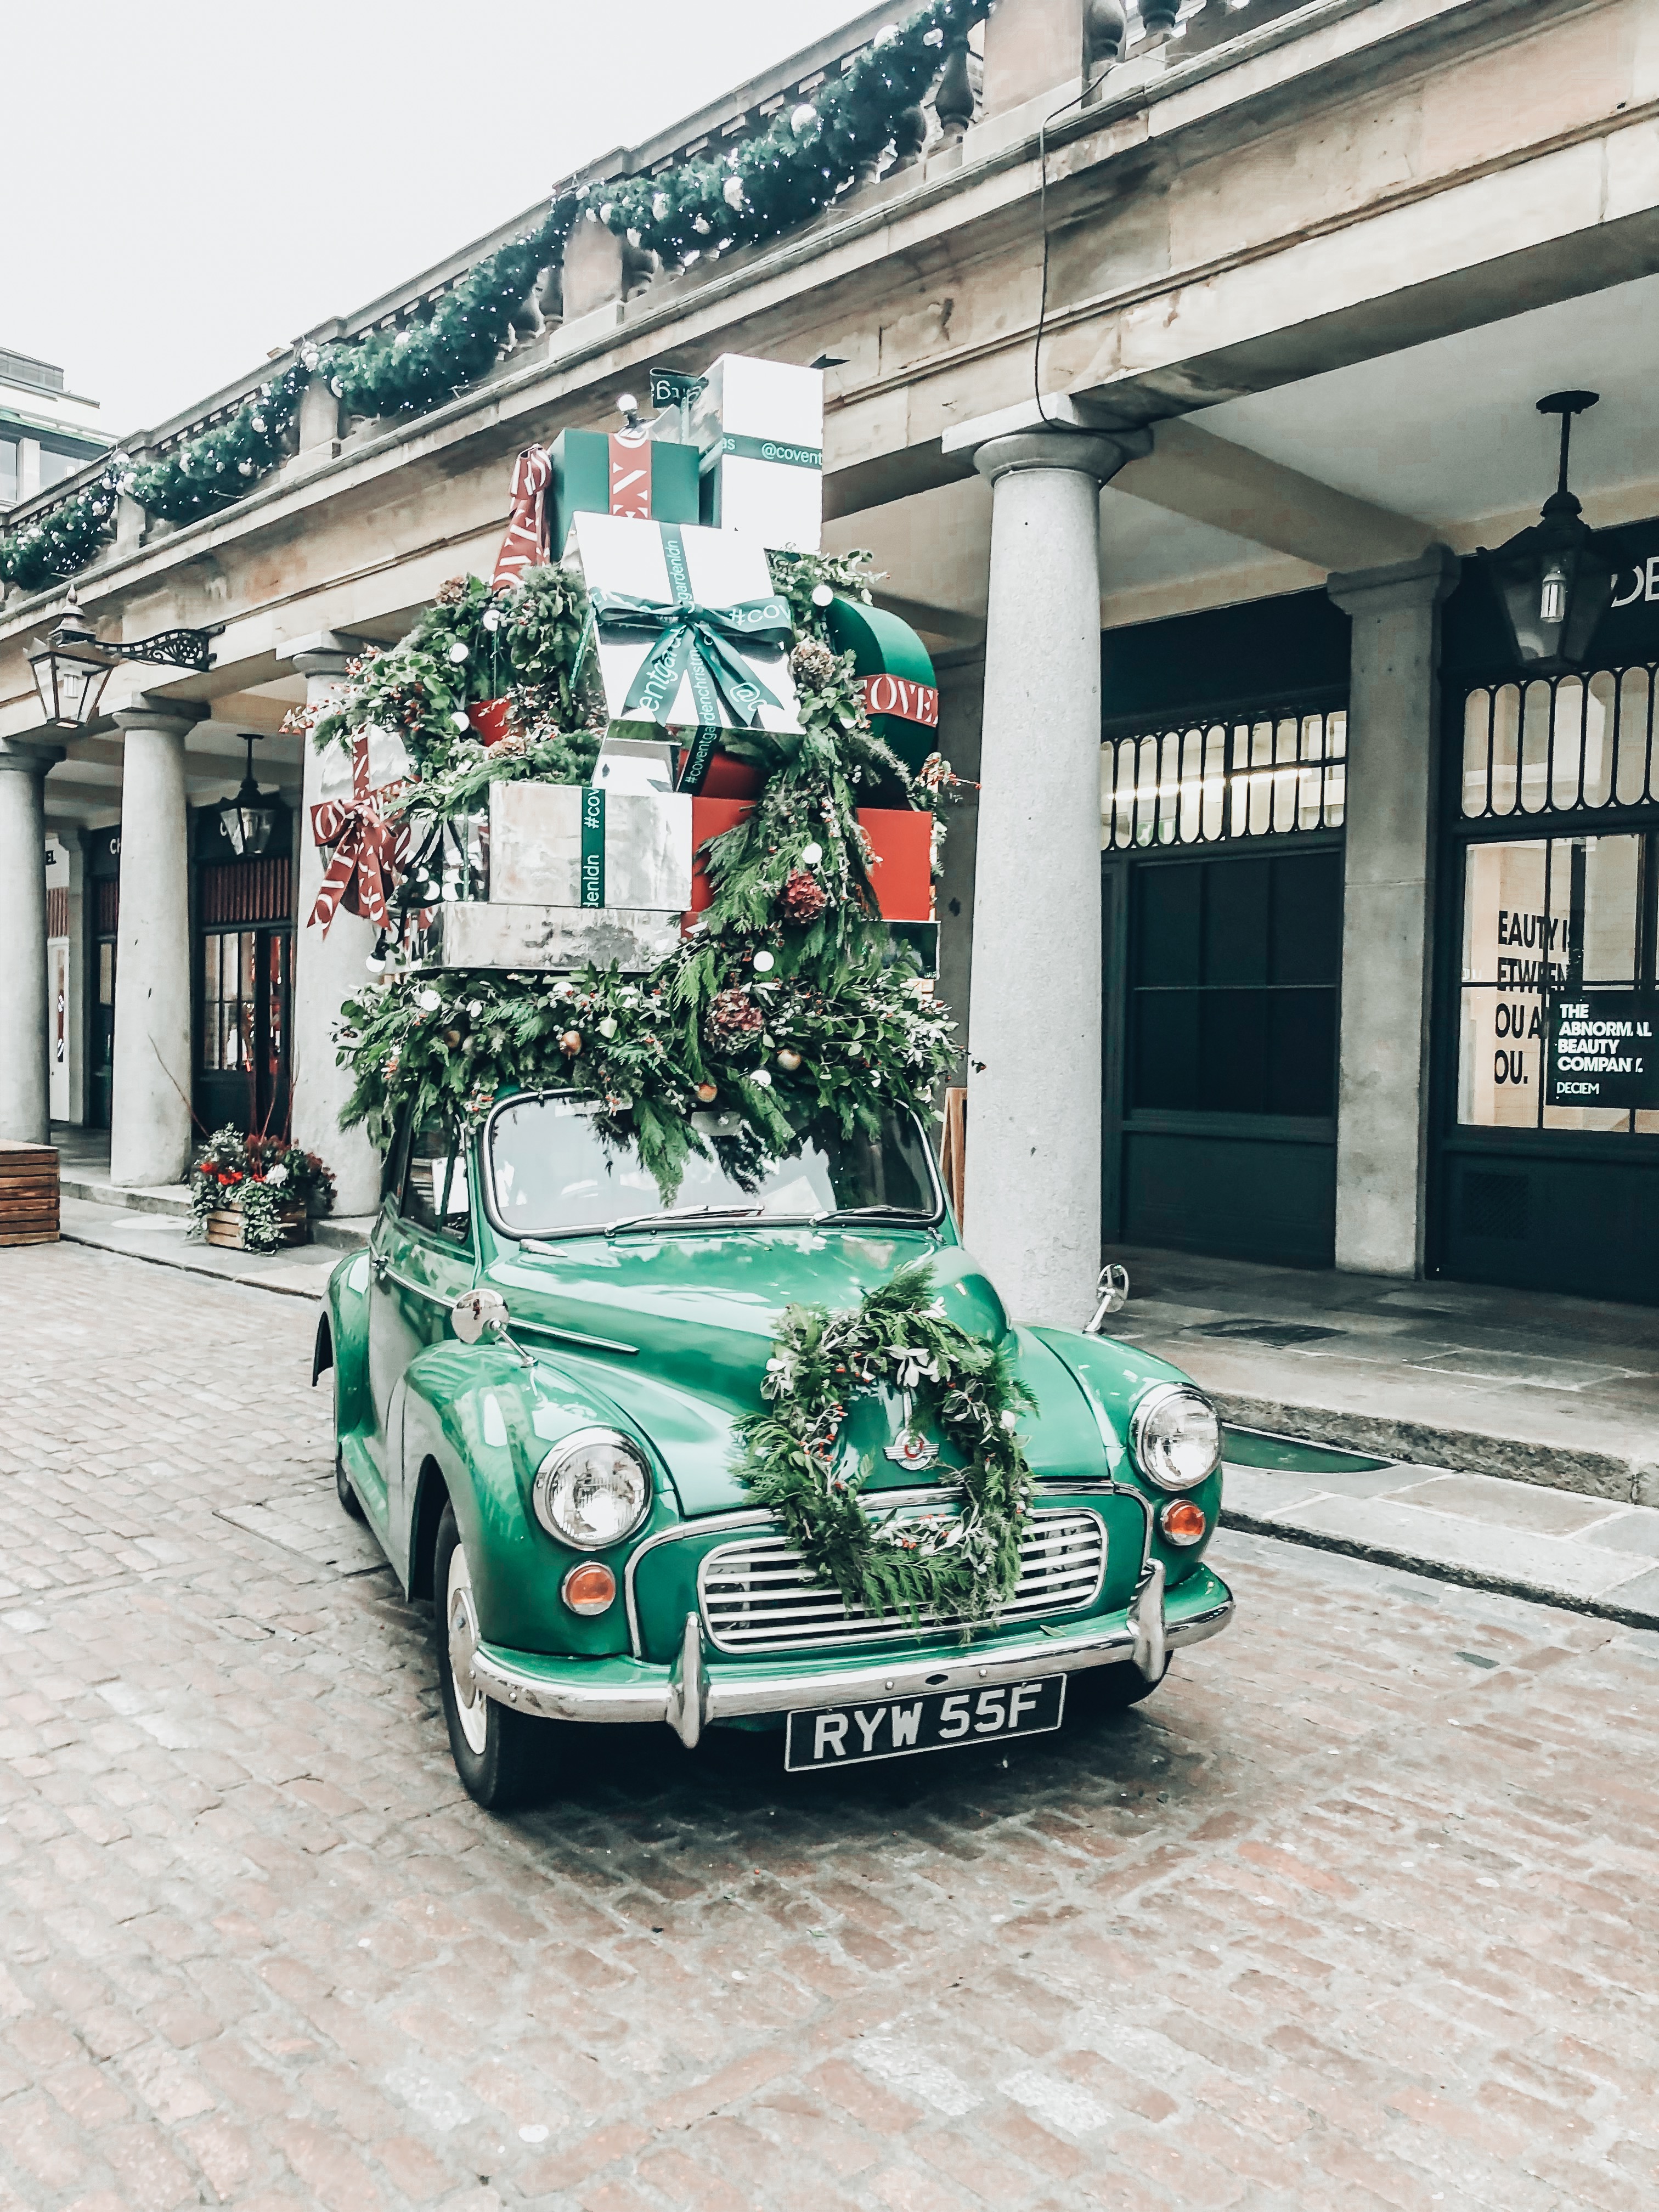 London Travel Guide during the Holiday Season - SHOP DANDY | A florida ...